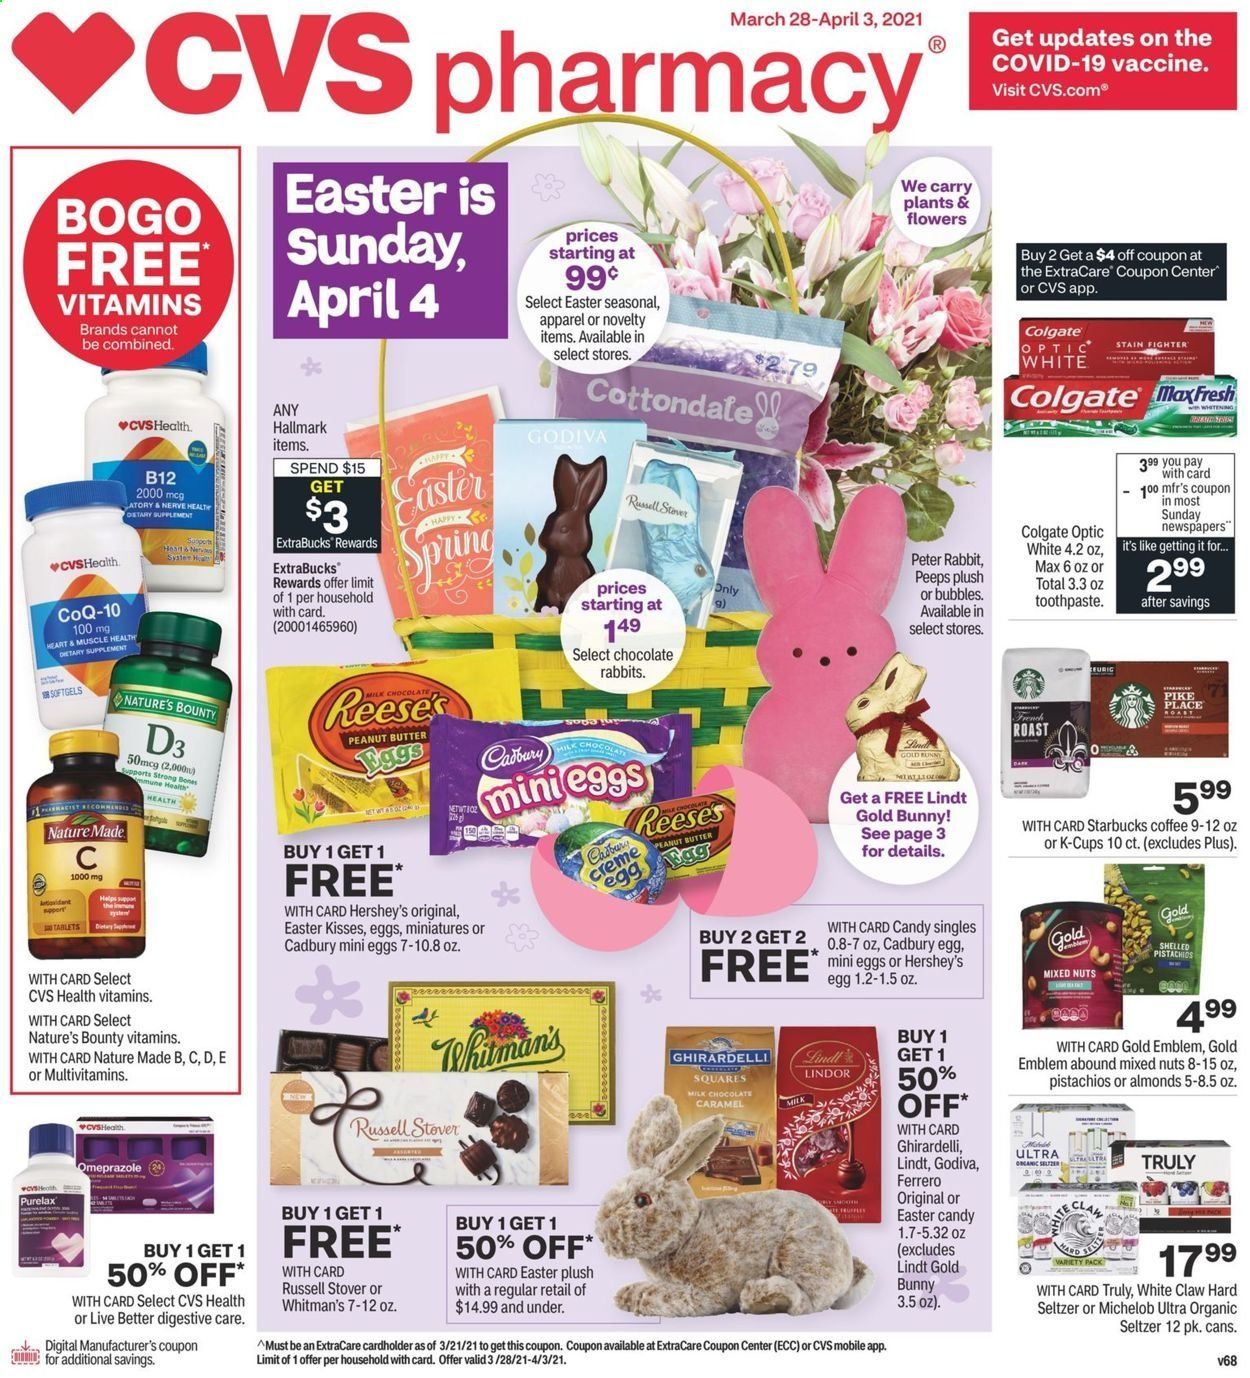 thumbnail - CVS Pharmacy Flyer - 03/28/2021 - 04/03/2021 - Sales products - Reese's, Hershey's, milk chocolate, chocolate, Lindt, Lindor, Ferrero Rocher, Bounty, Godiva, Cadbury, Digestive, Ghirardelli, Peeps, almonds, pistachios, mixed nuts, seltzer water, coffee, Starbucks, coffee capsules, K-Cups, White Claw, Hard Seltzer, TRULY, Colgate, toothpaste, Purelax, plush toy, multivitamin, Nature Made, Nature's Bounty, vitamin D3, beer, Michelob. Page 1.